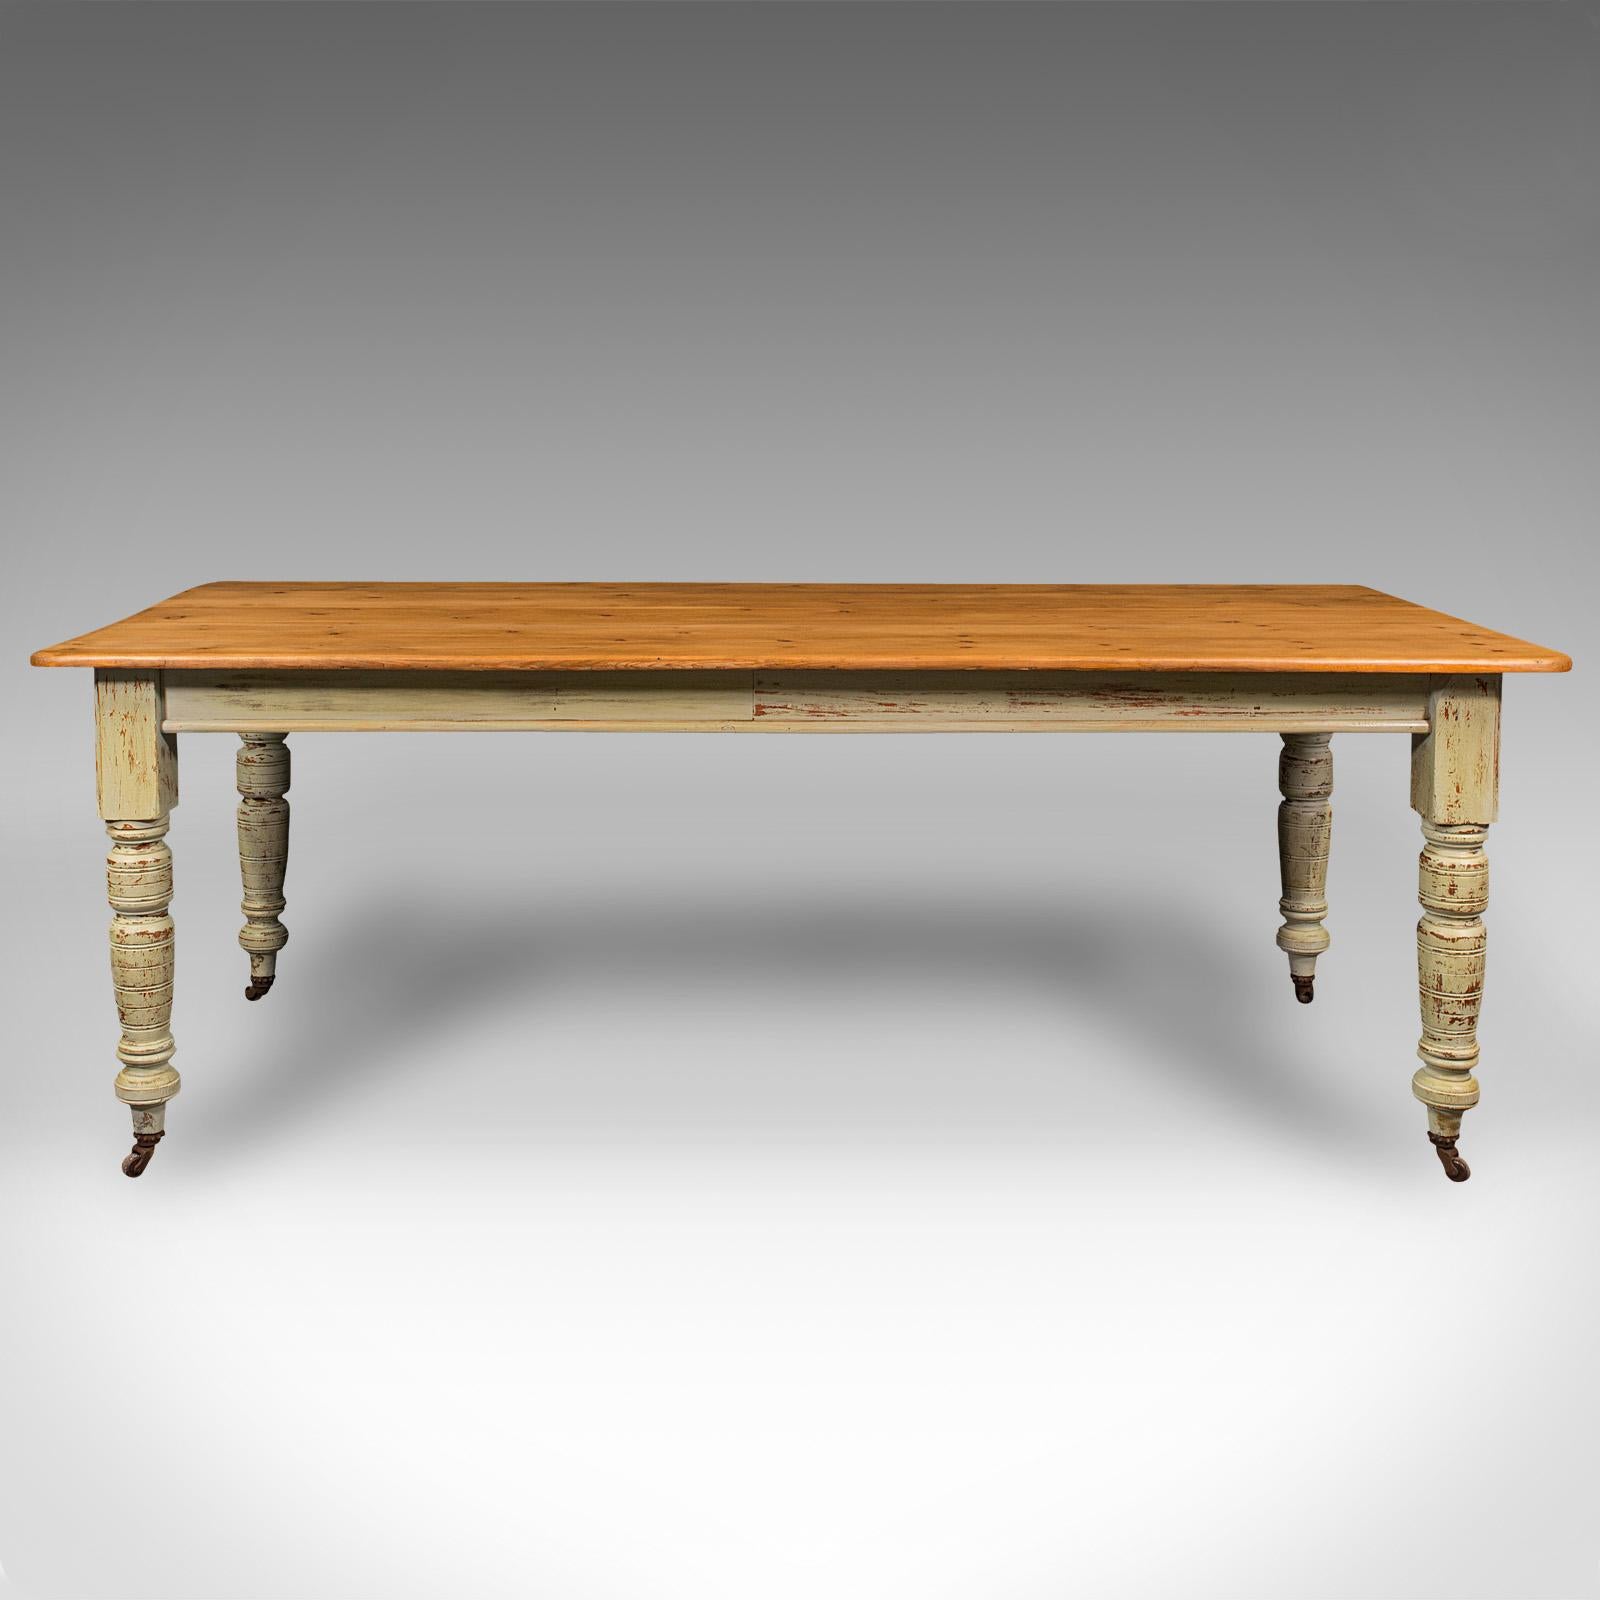 This is an antique farmhouse table. An English, pine 6 seat dining or kitchen table, dating to the Victorian period, circa 1900 and later.

Charming family dining table with country house appeal.
Displays a desirable aged patina